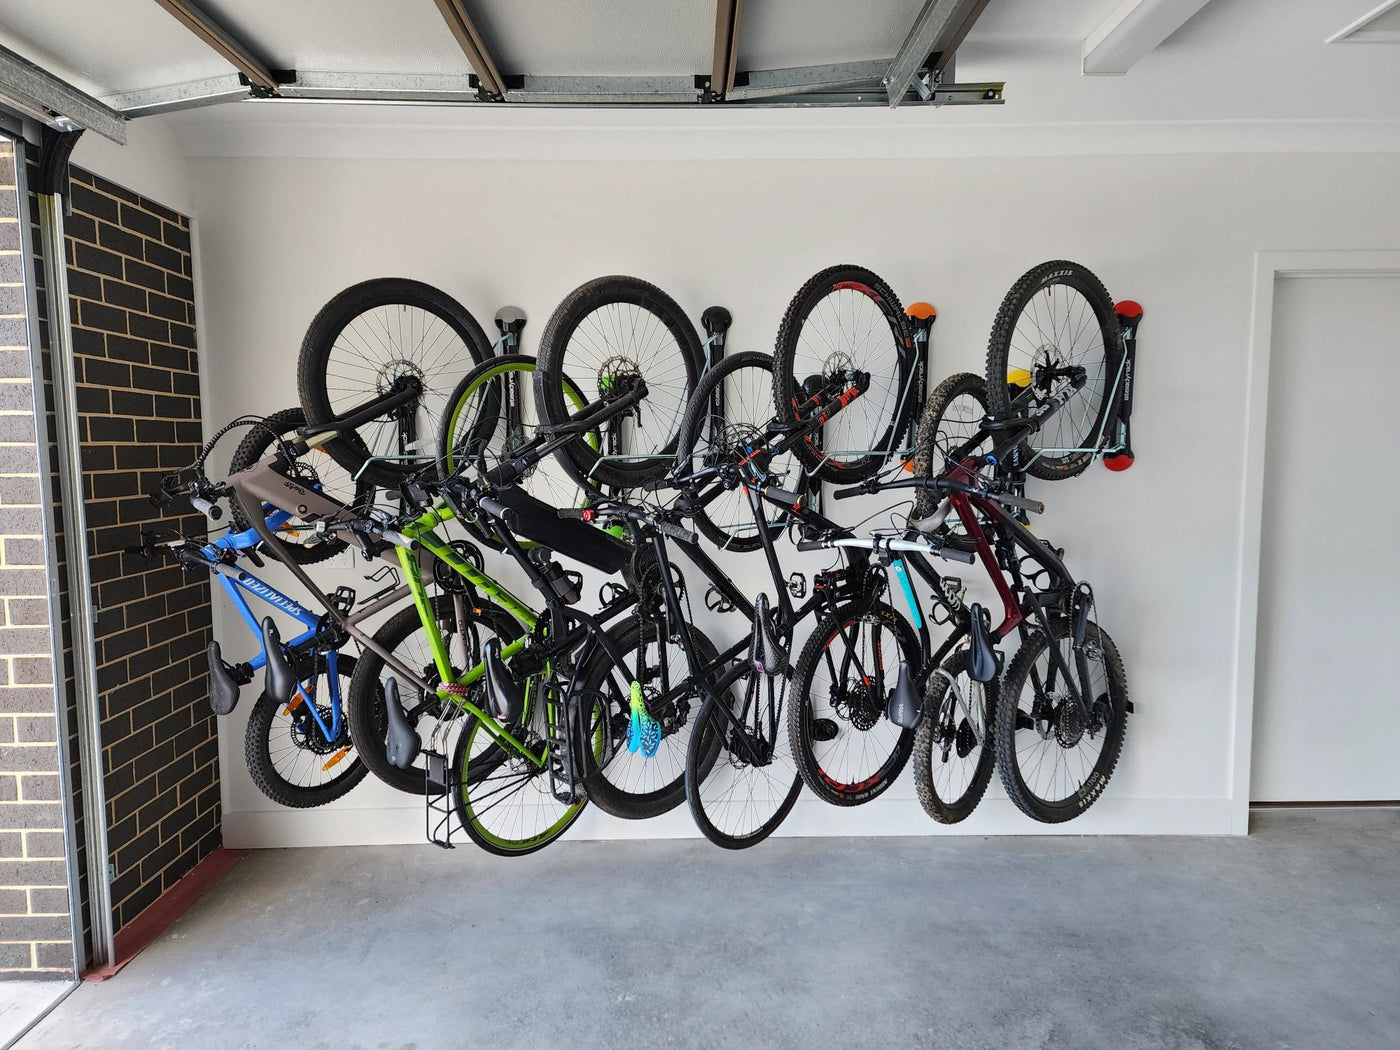 8 Vertical Bike Racks Compared - Which is Best for YOUR Bikes?